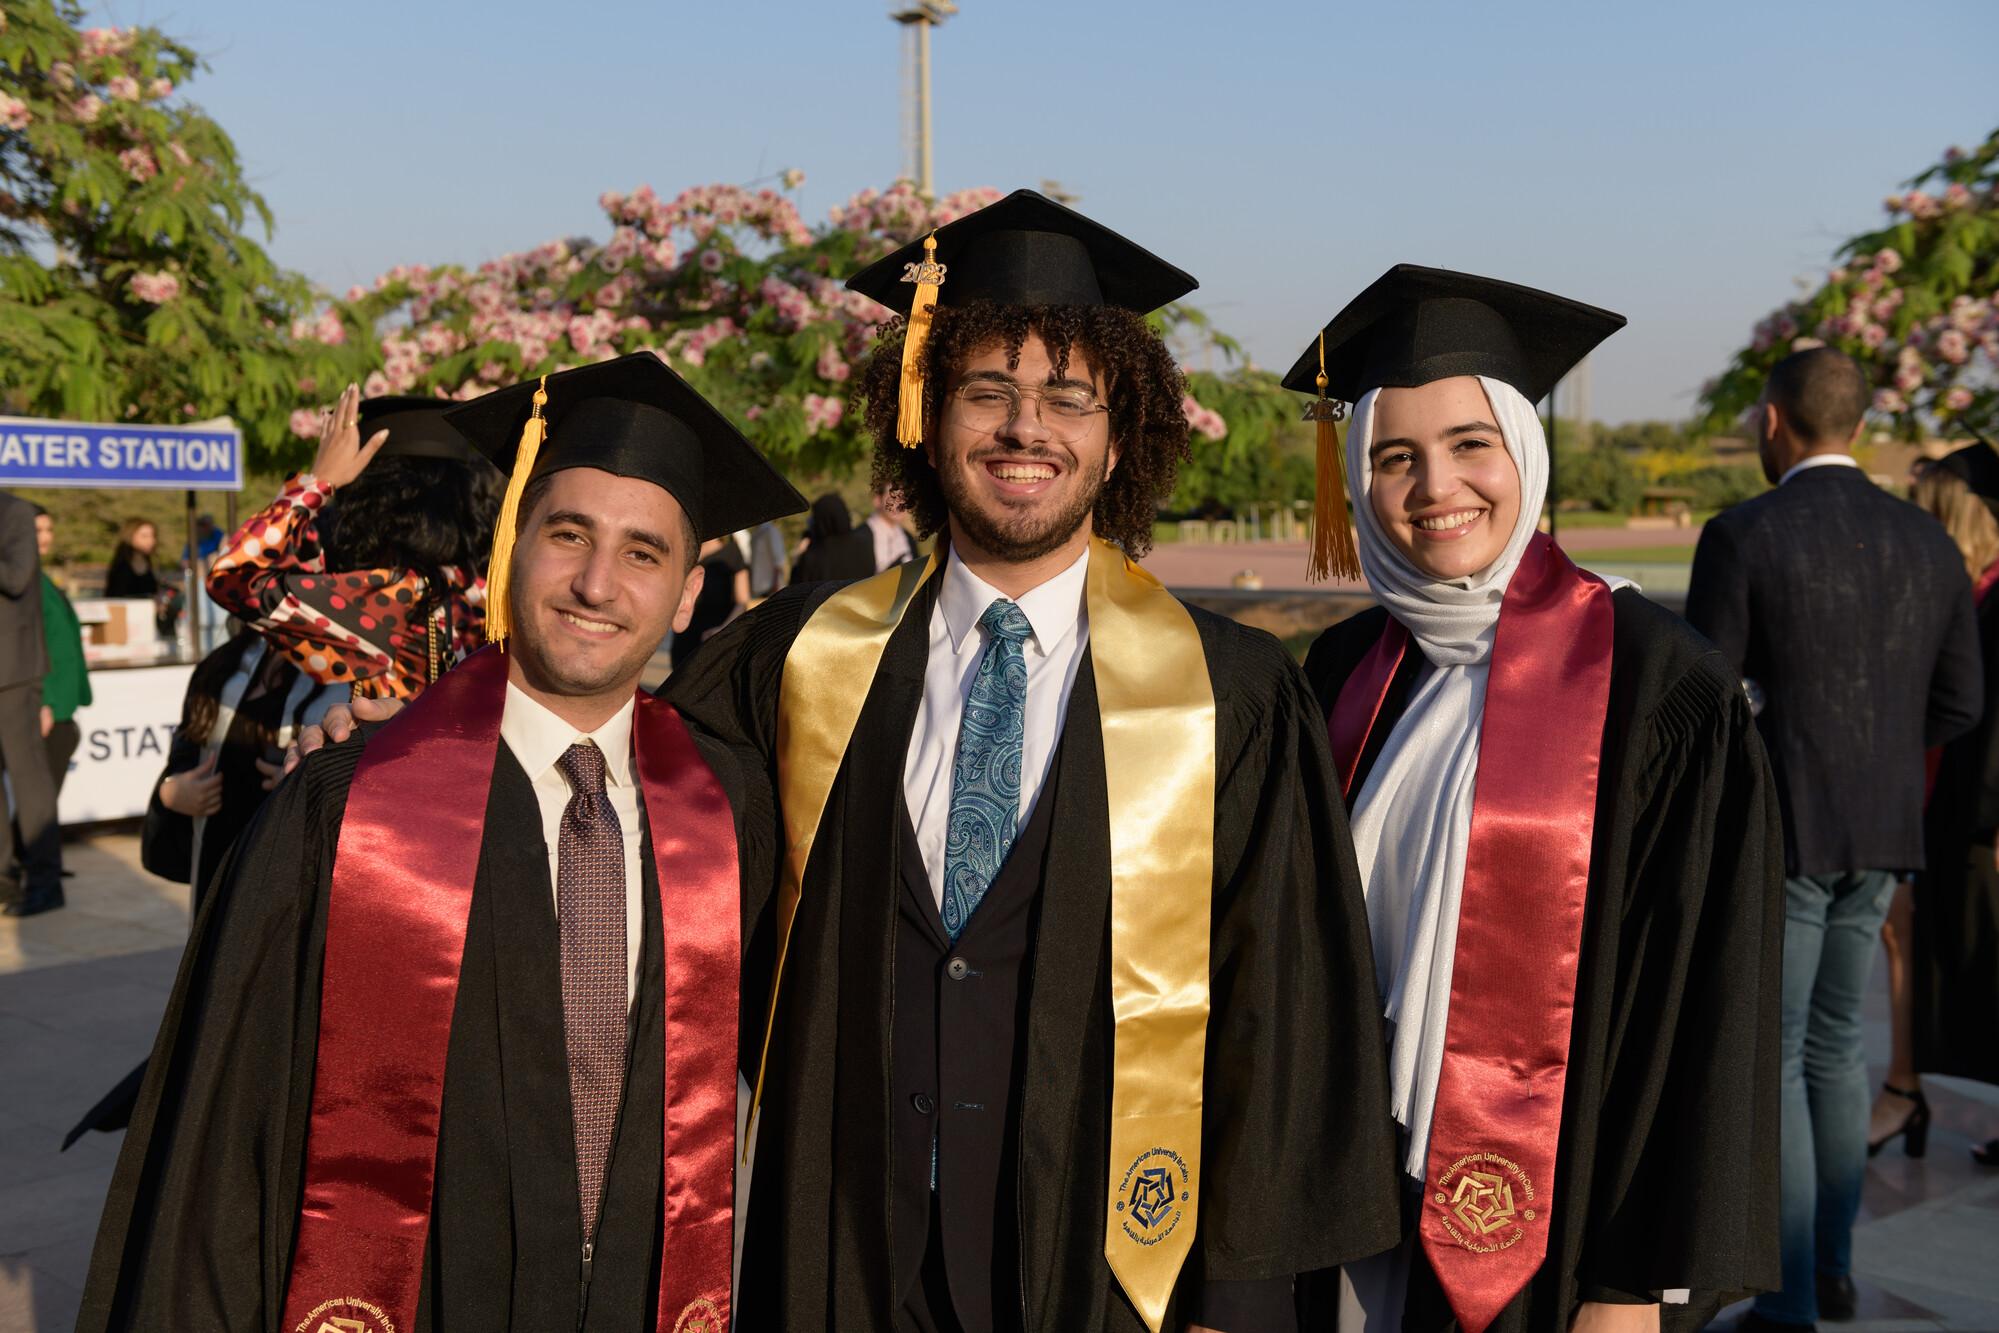 Two boys and a girl wearing a cap and gown smiling in an outdoor setting